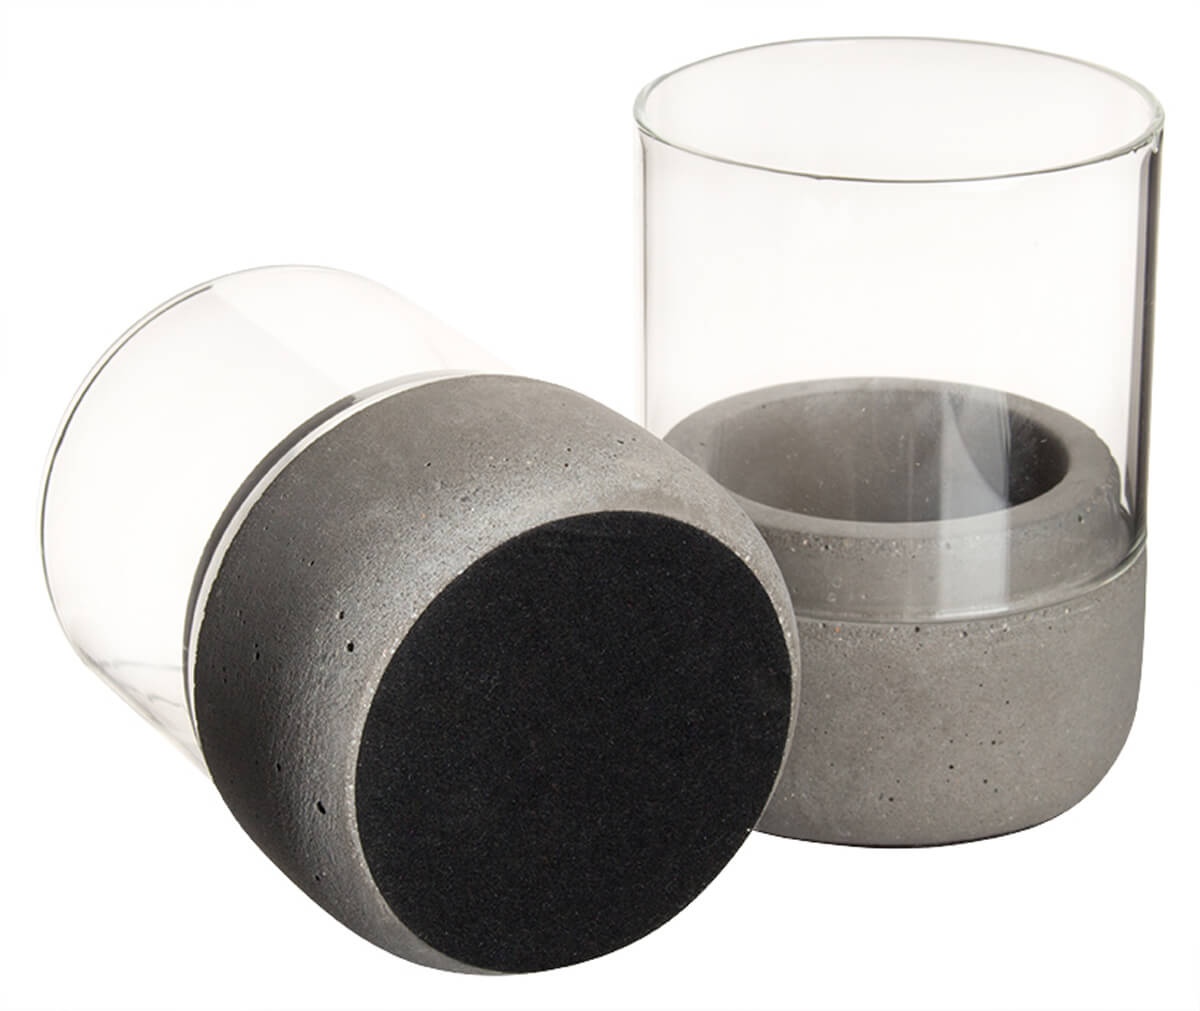 Wind light / tealight holder - concrete and glass (set of 2)